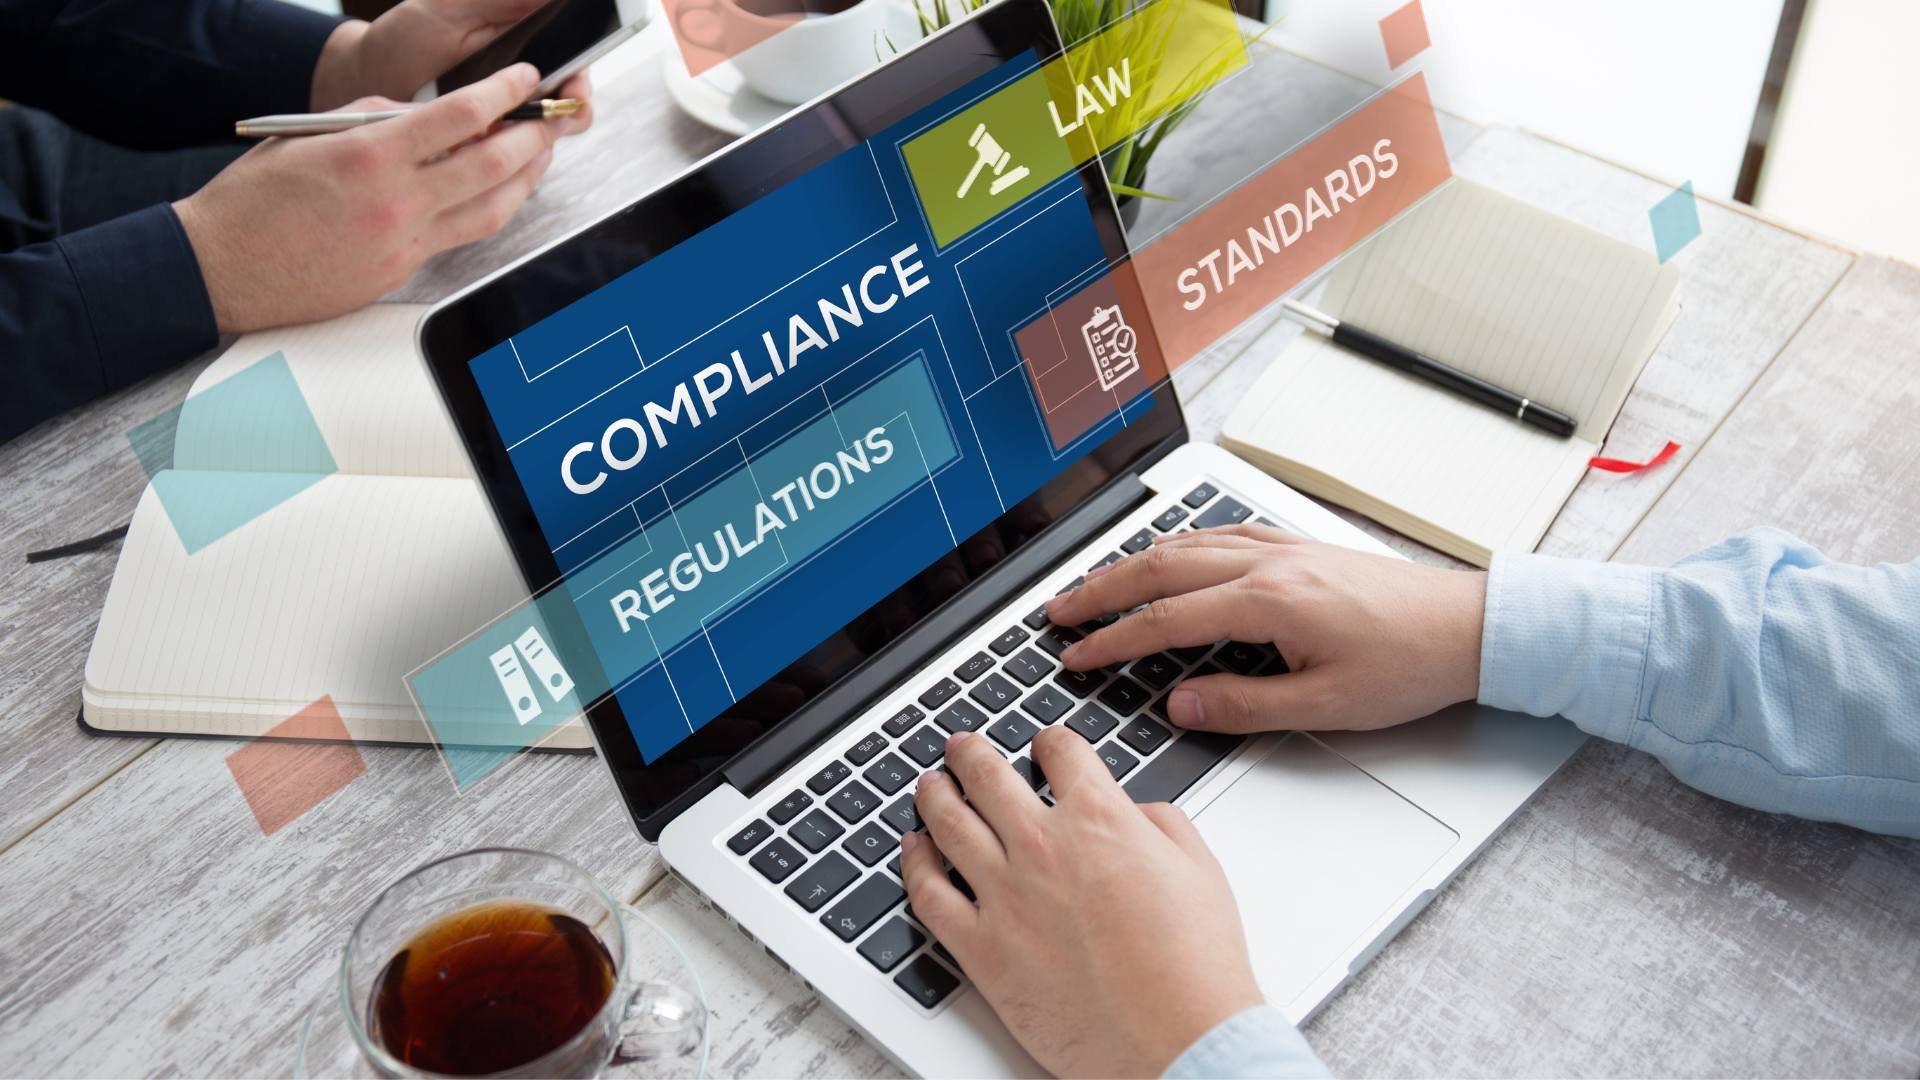 compliance training with multi-tenant LMS